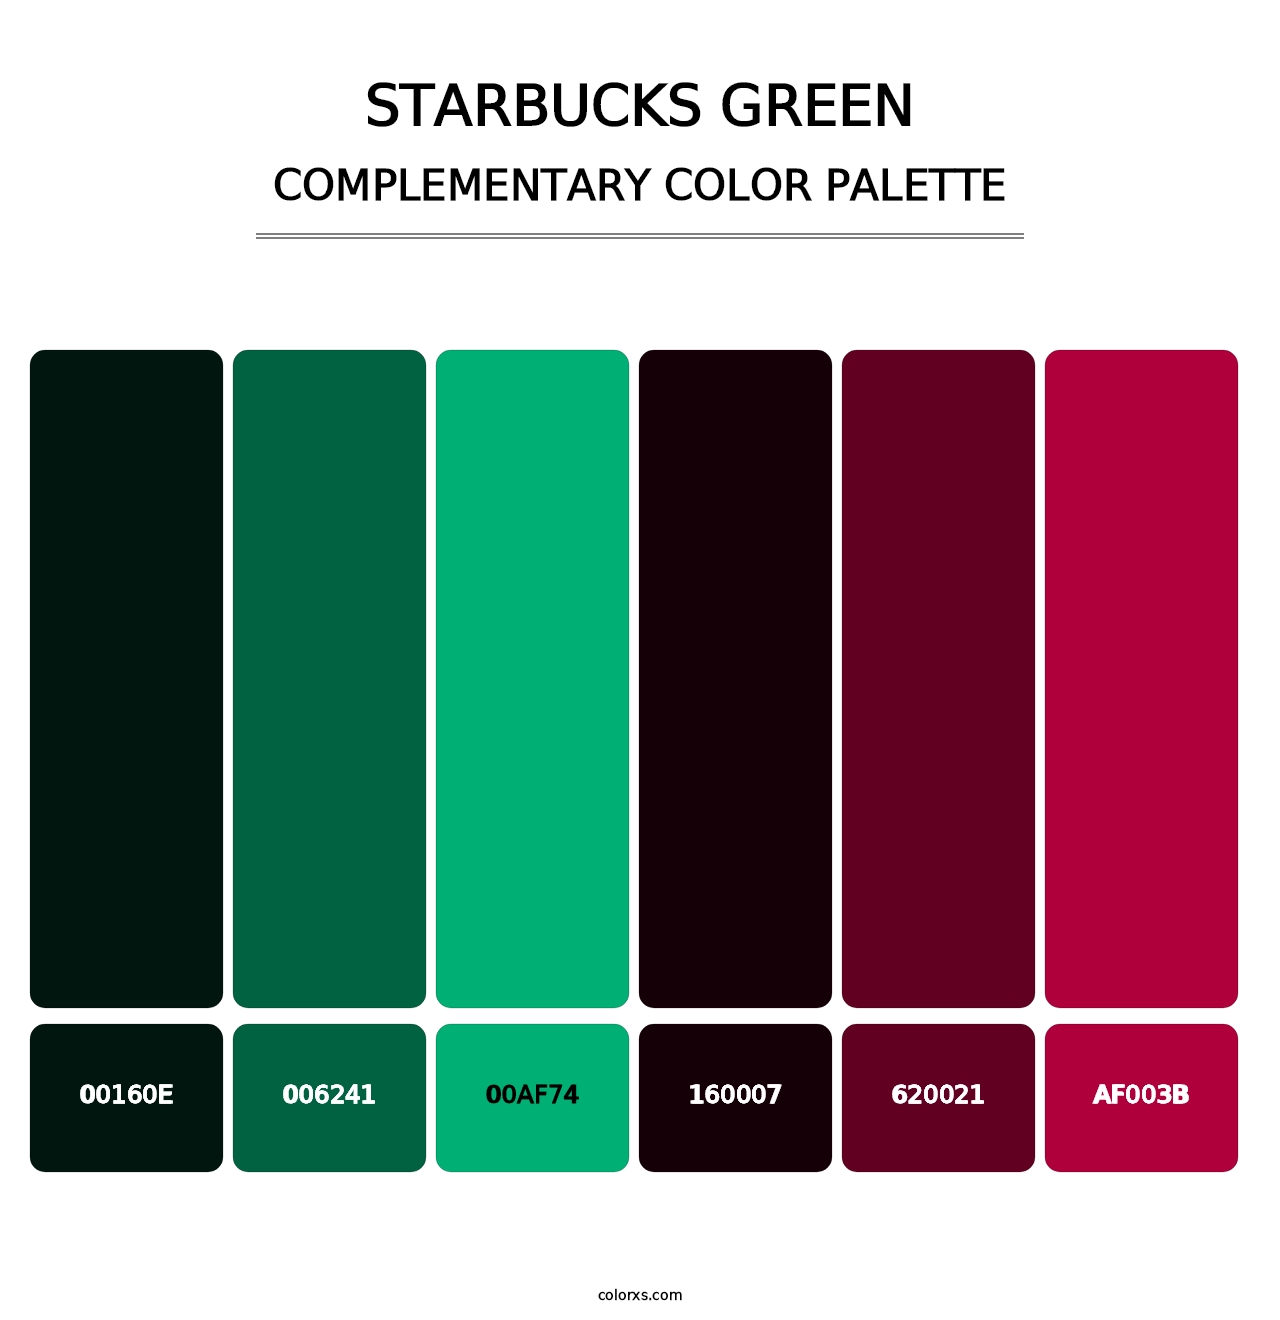 Starbucks Green - Complementary Color Palette